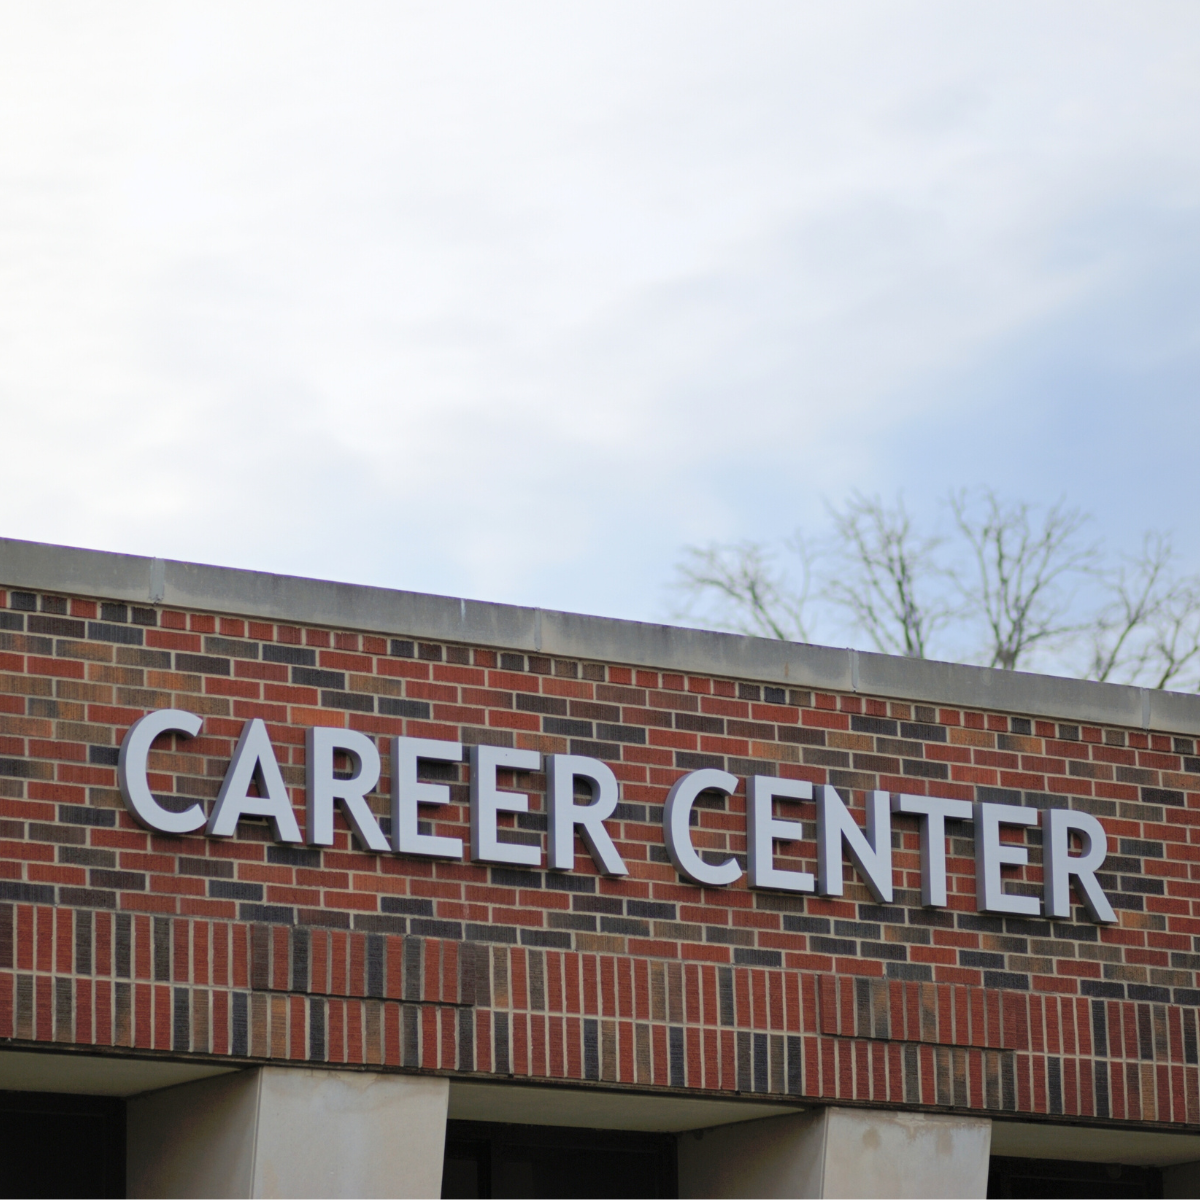 Tomorrow’s Campus-Based Career Services are Personal, not Transactional